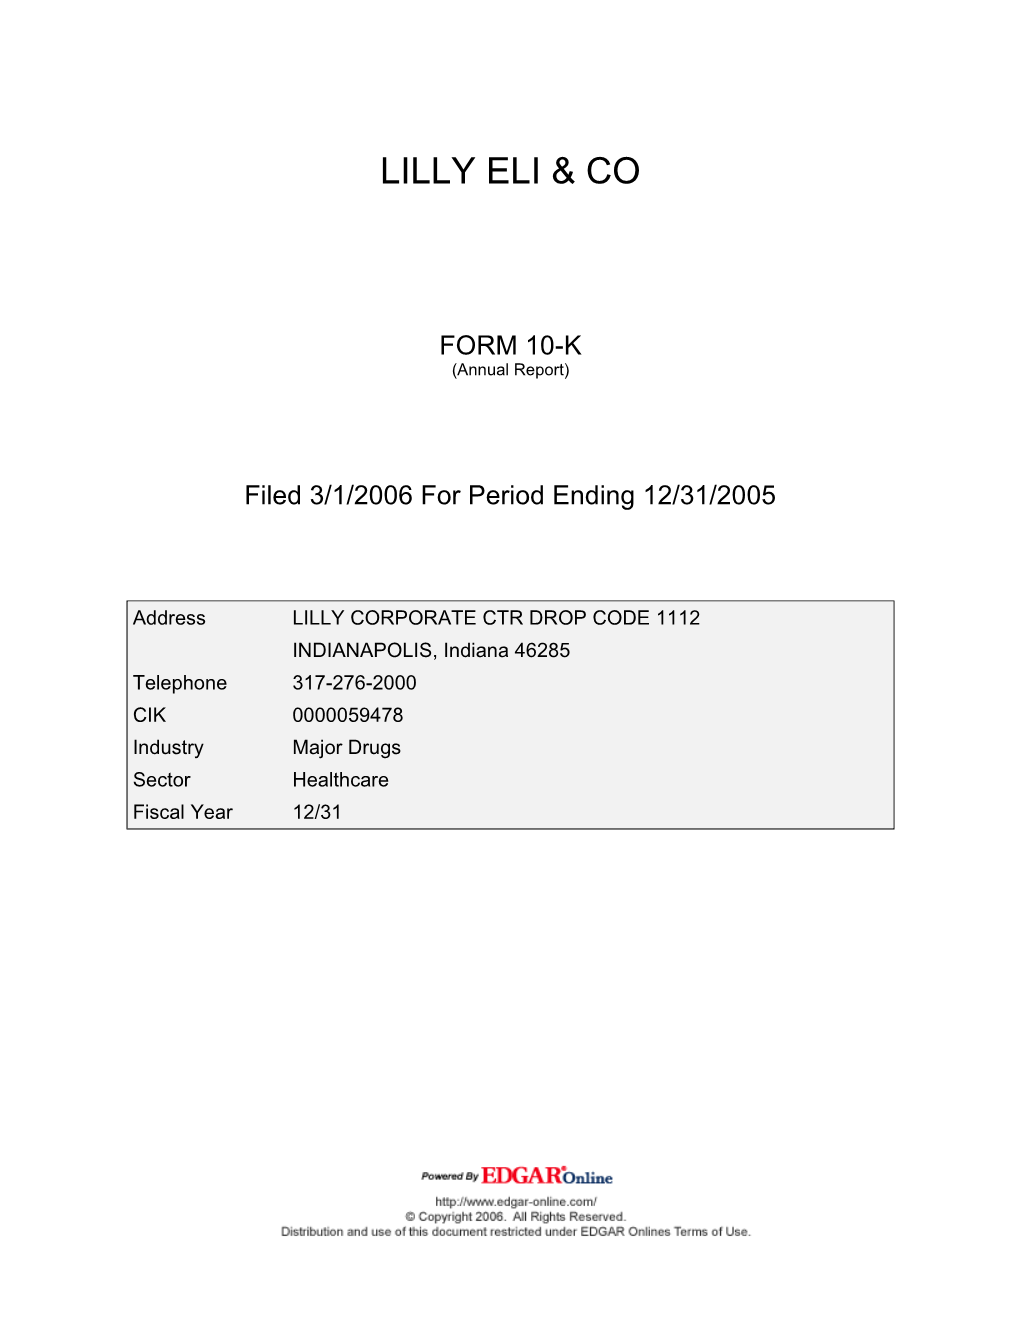 Lilly Eli & Co